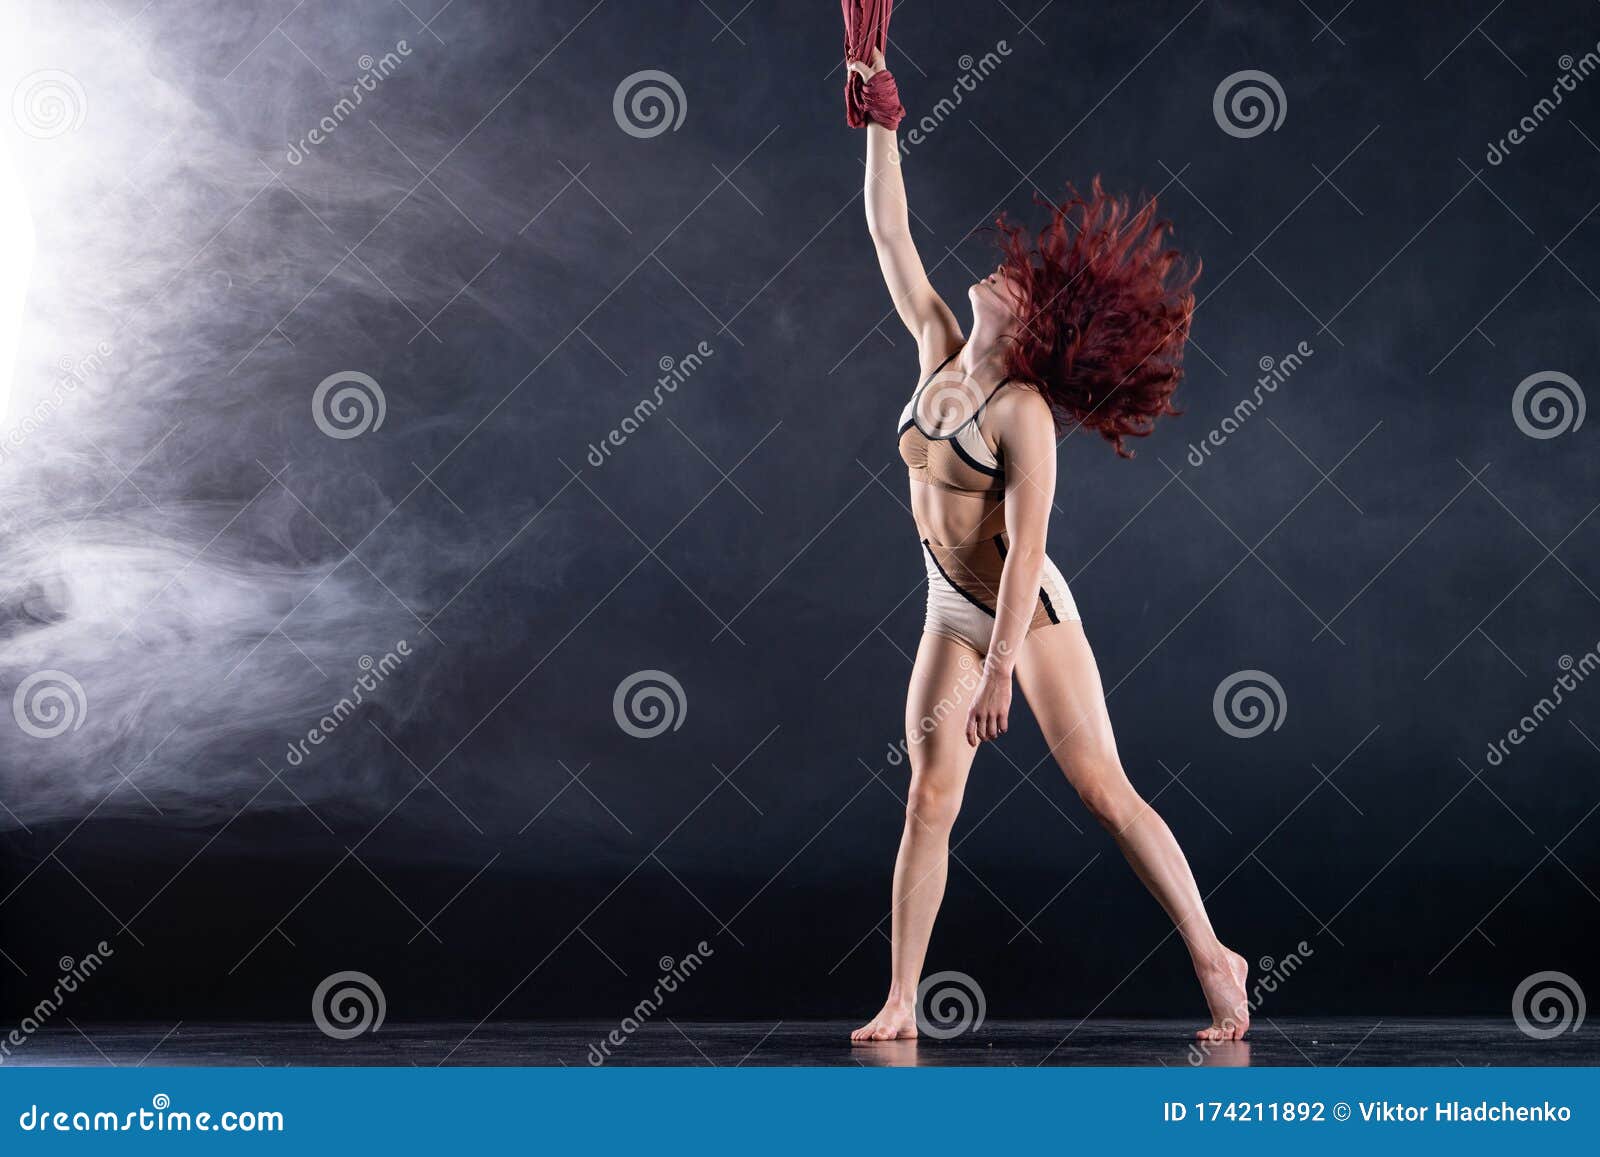 red head chick dancing nude